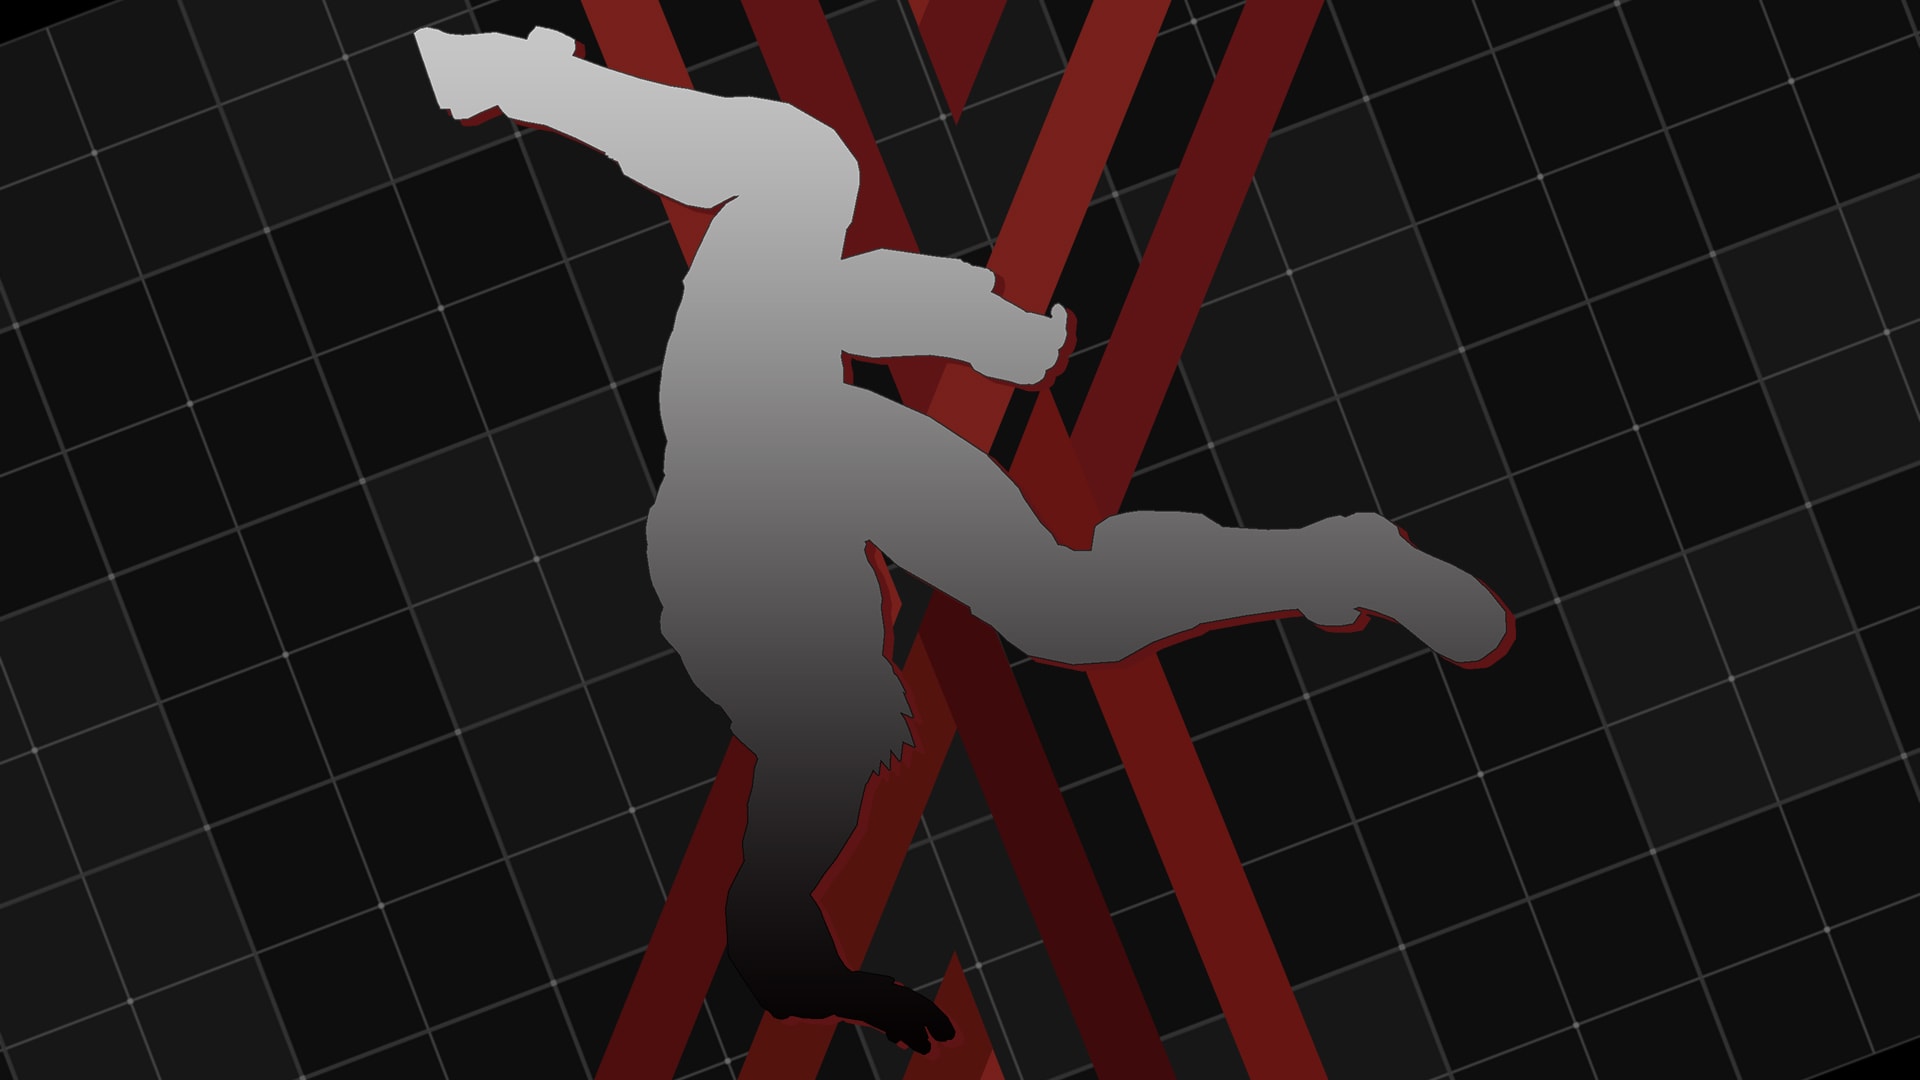 Outer Emote "Breakdance"